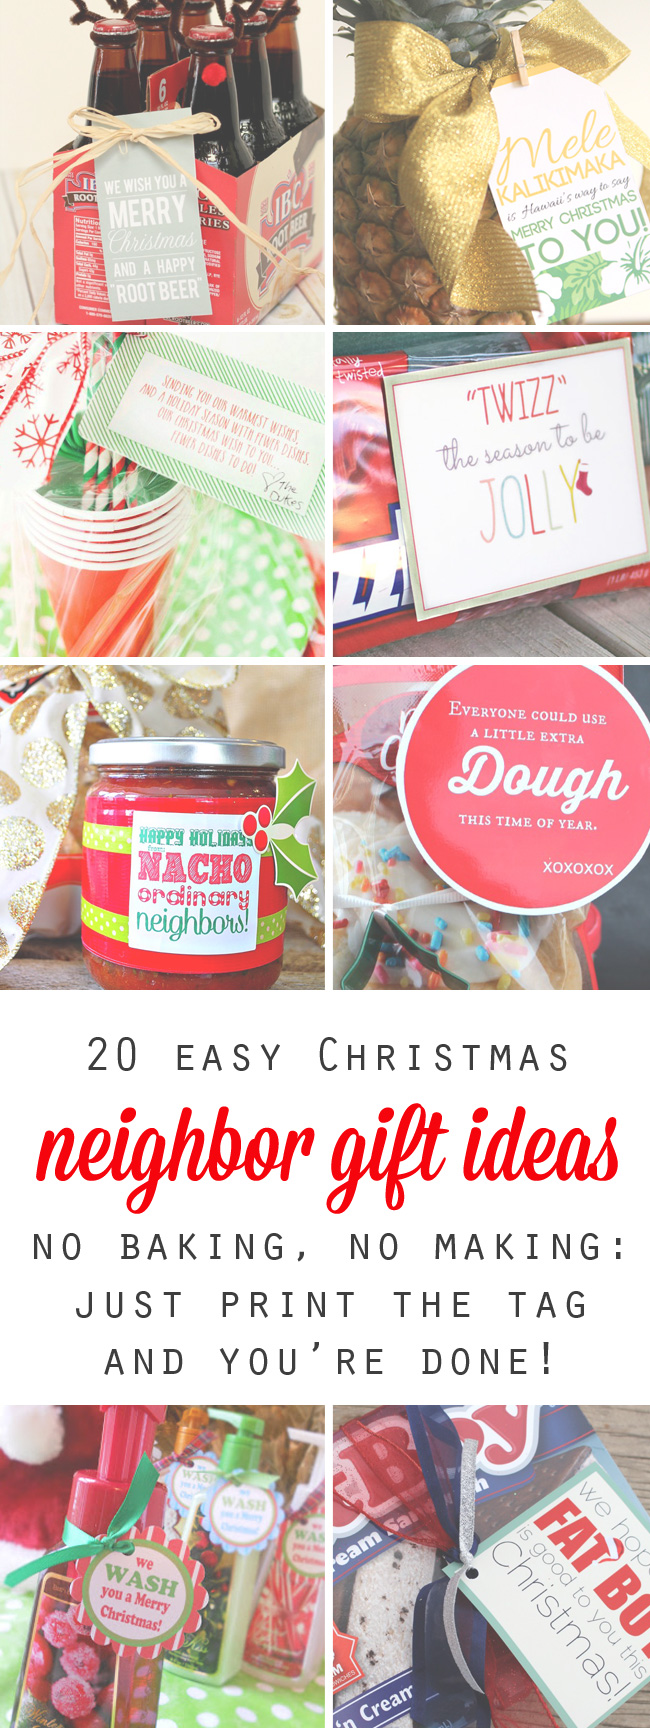 DIY Budget Friendly Christmas Gifts | Lraedesign